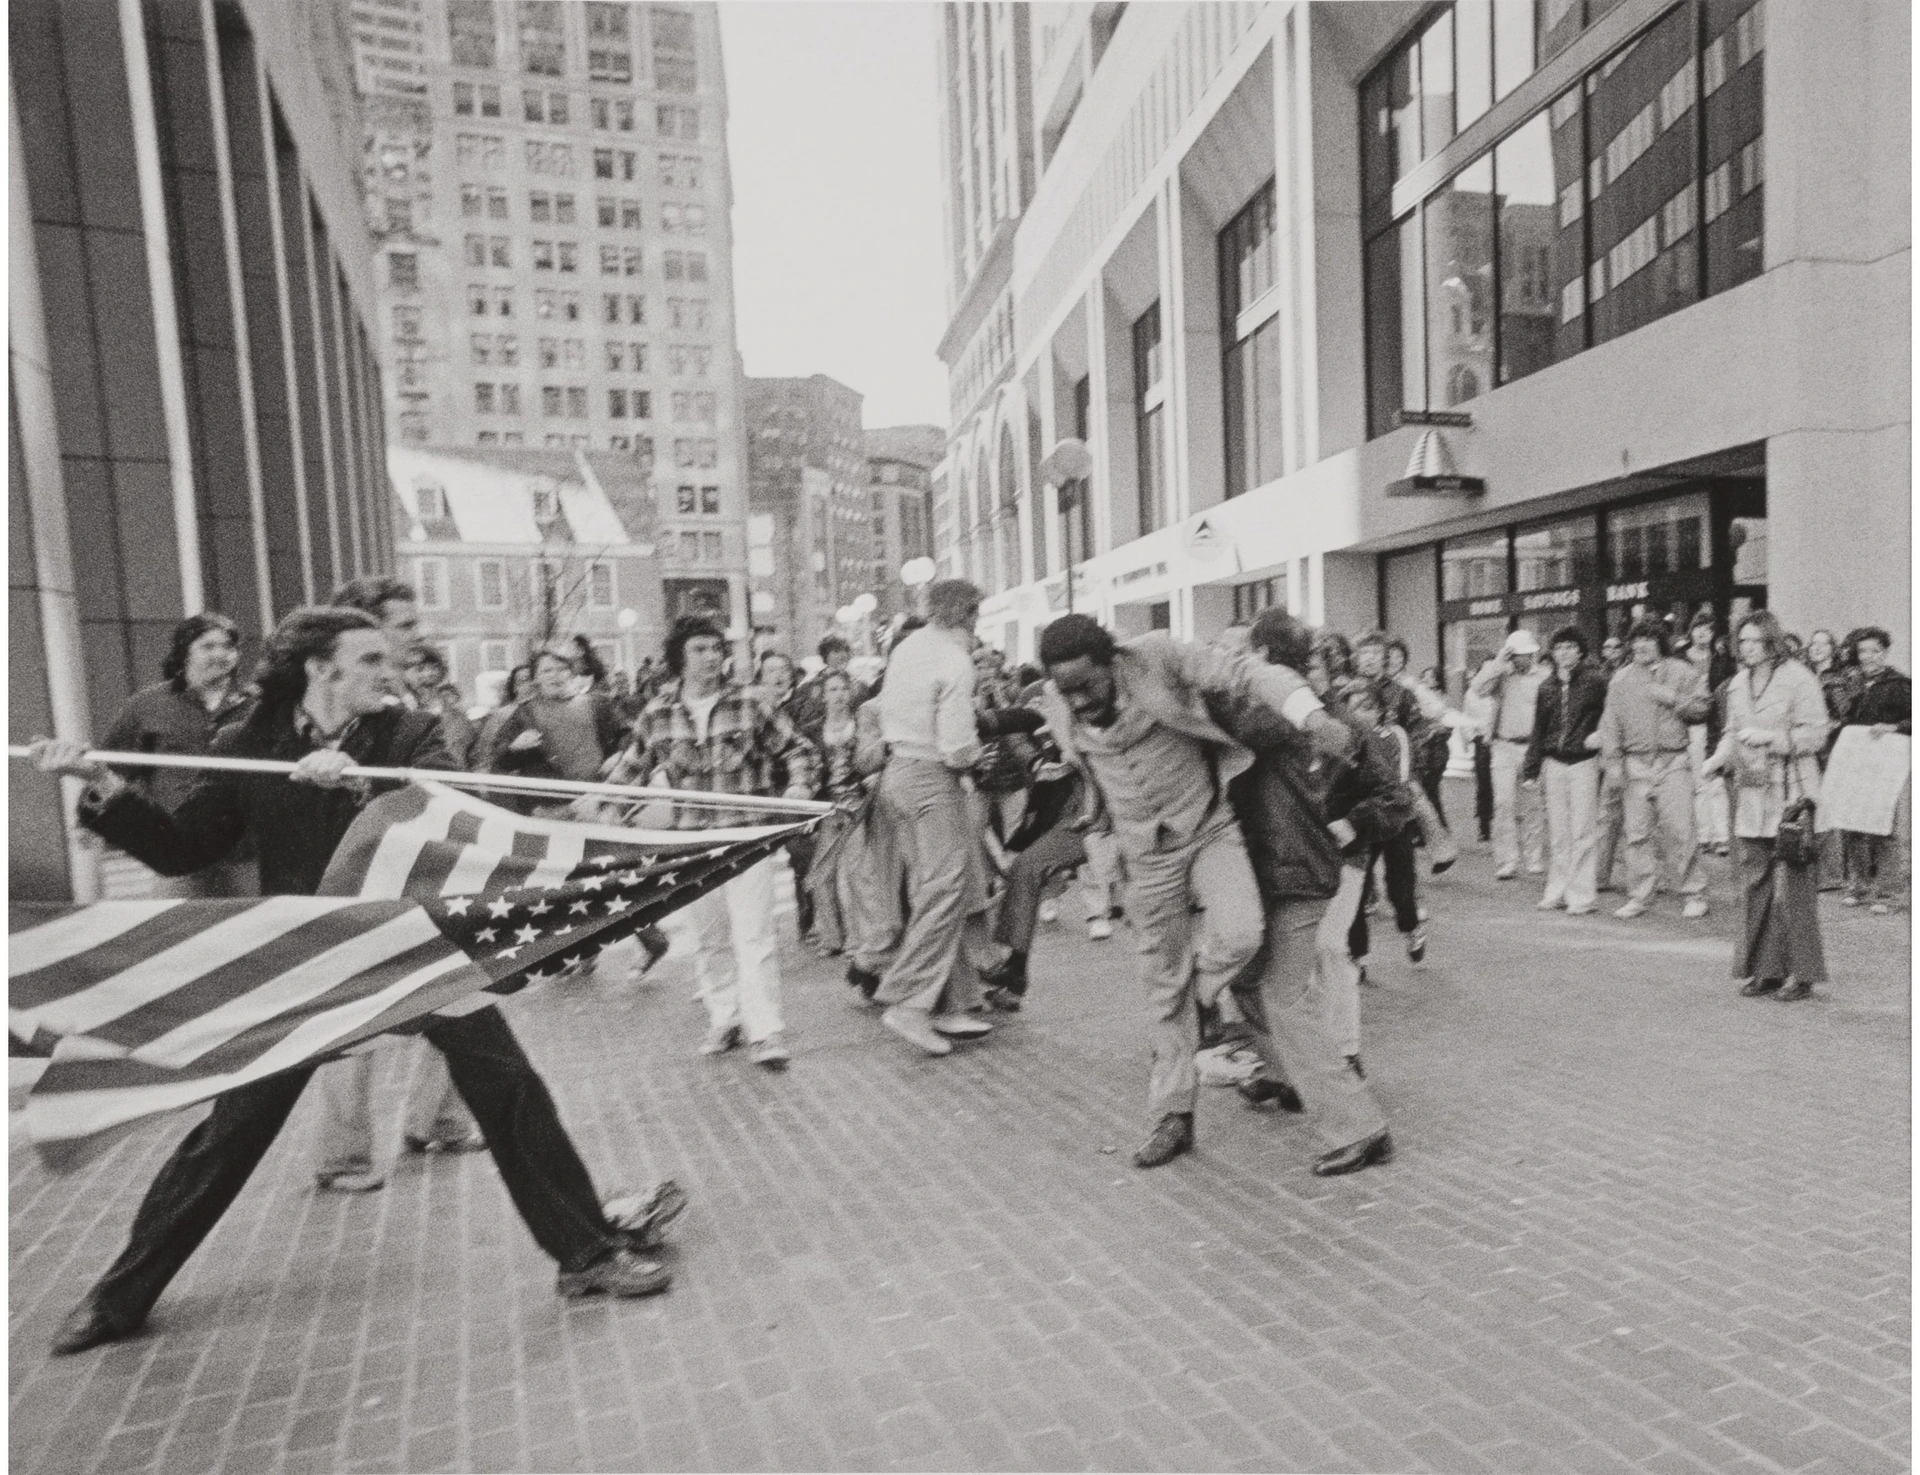 The Soiling of the Old Glory, 1976